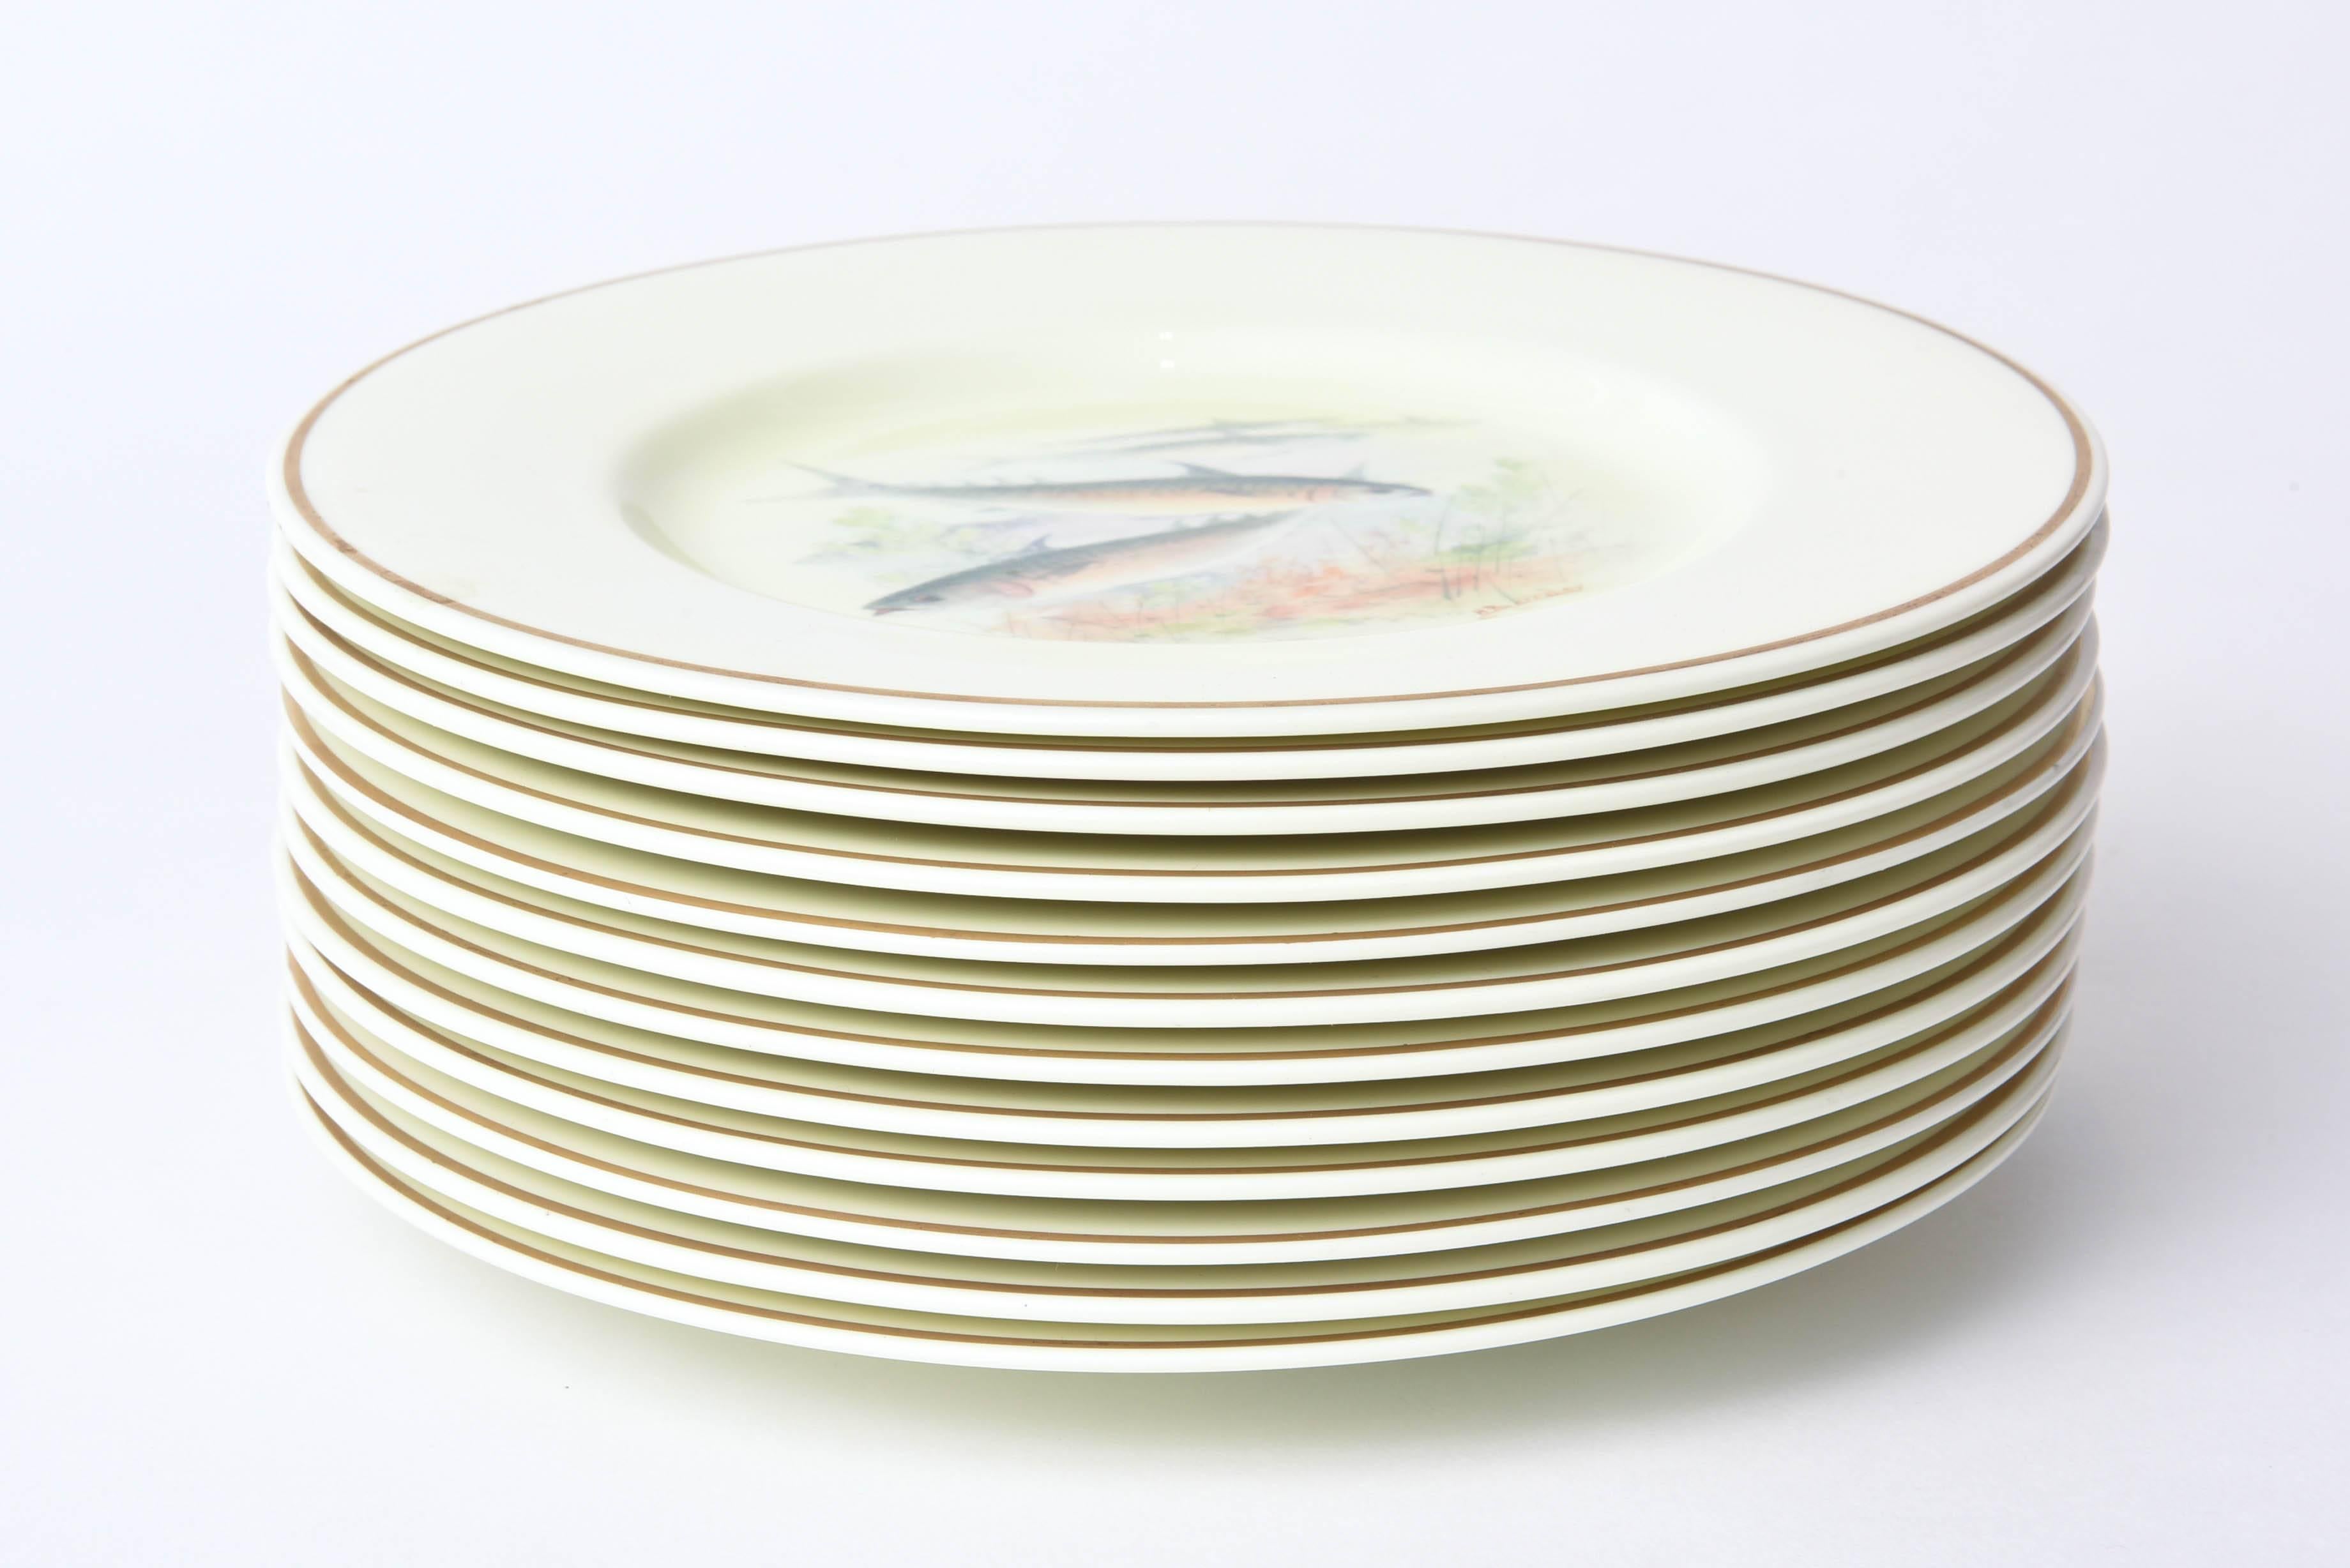 12 Antique English Fish Plates Hand-Painted and Artist Signed, circa 1915 3